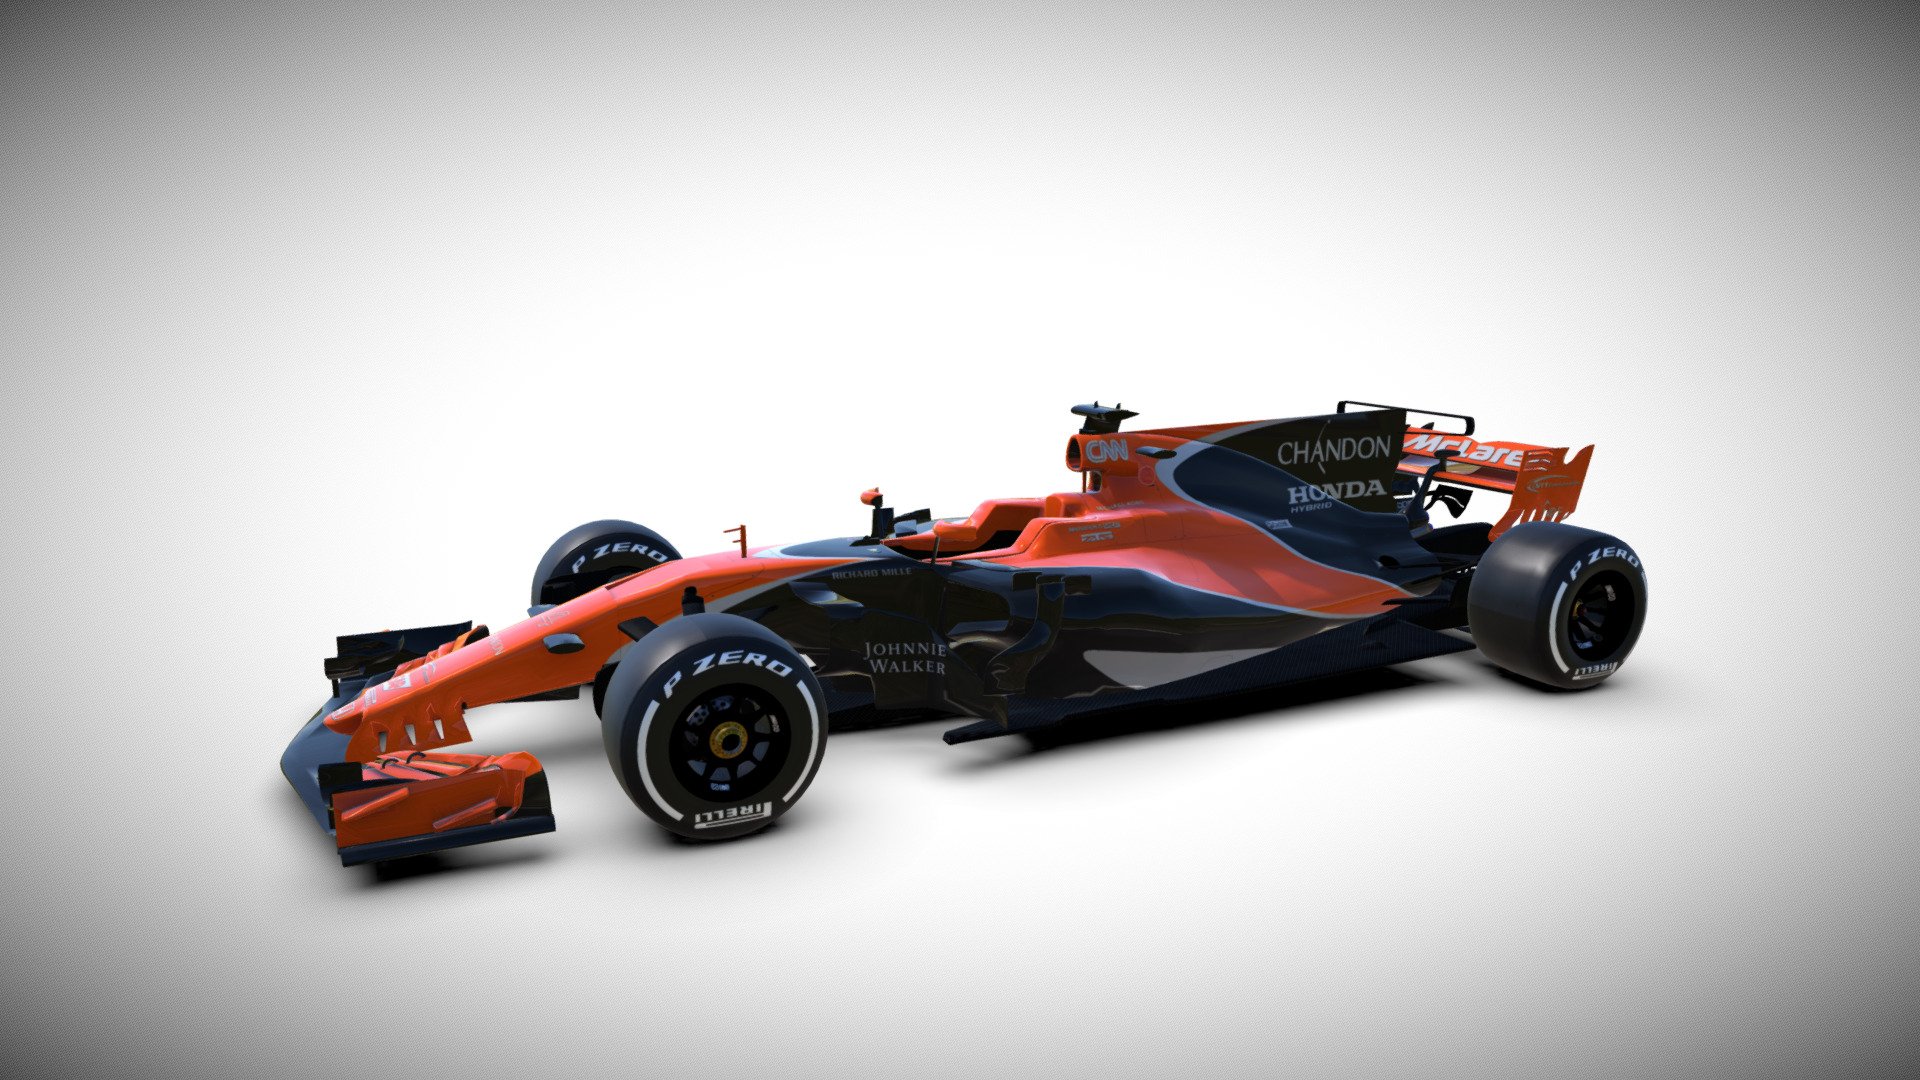 3D model from the McLaren Honda F1 2017
Low poly - McLaren Honda MCL32 F1 2017 - 3D model by Excalibur 3d model